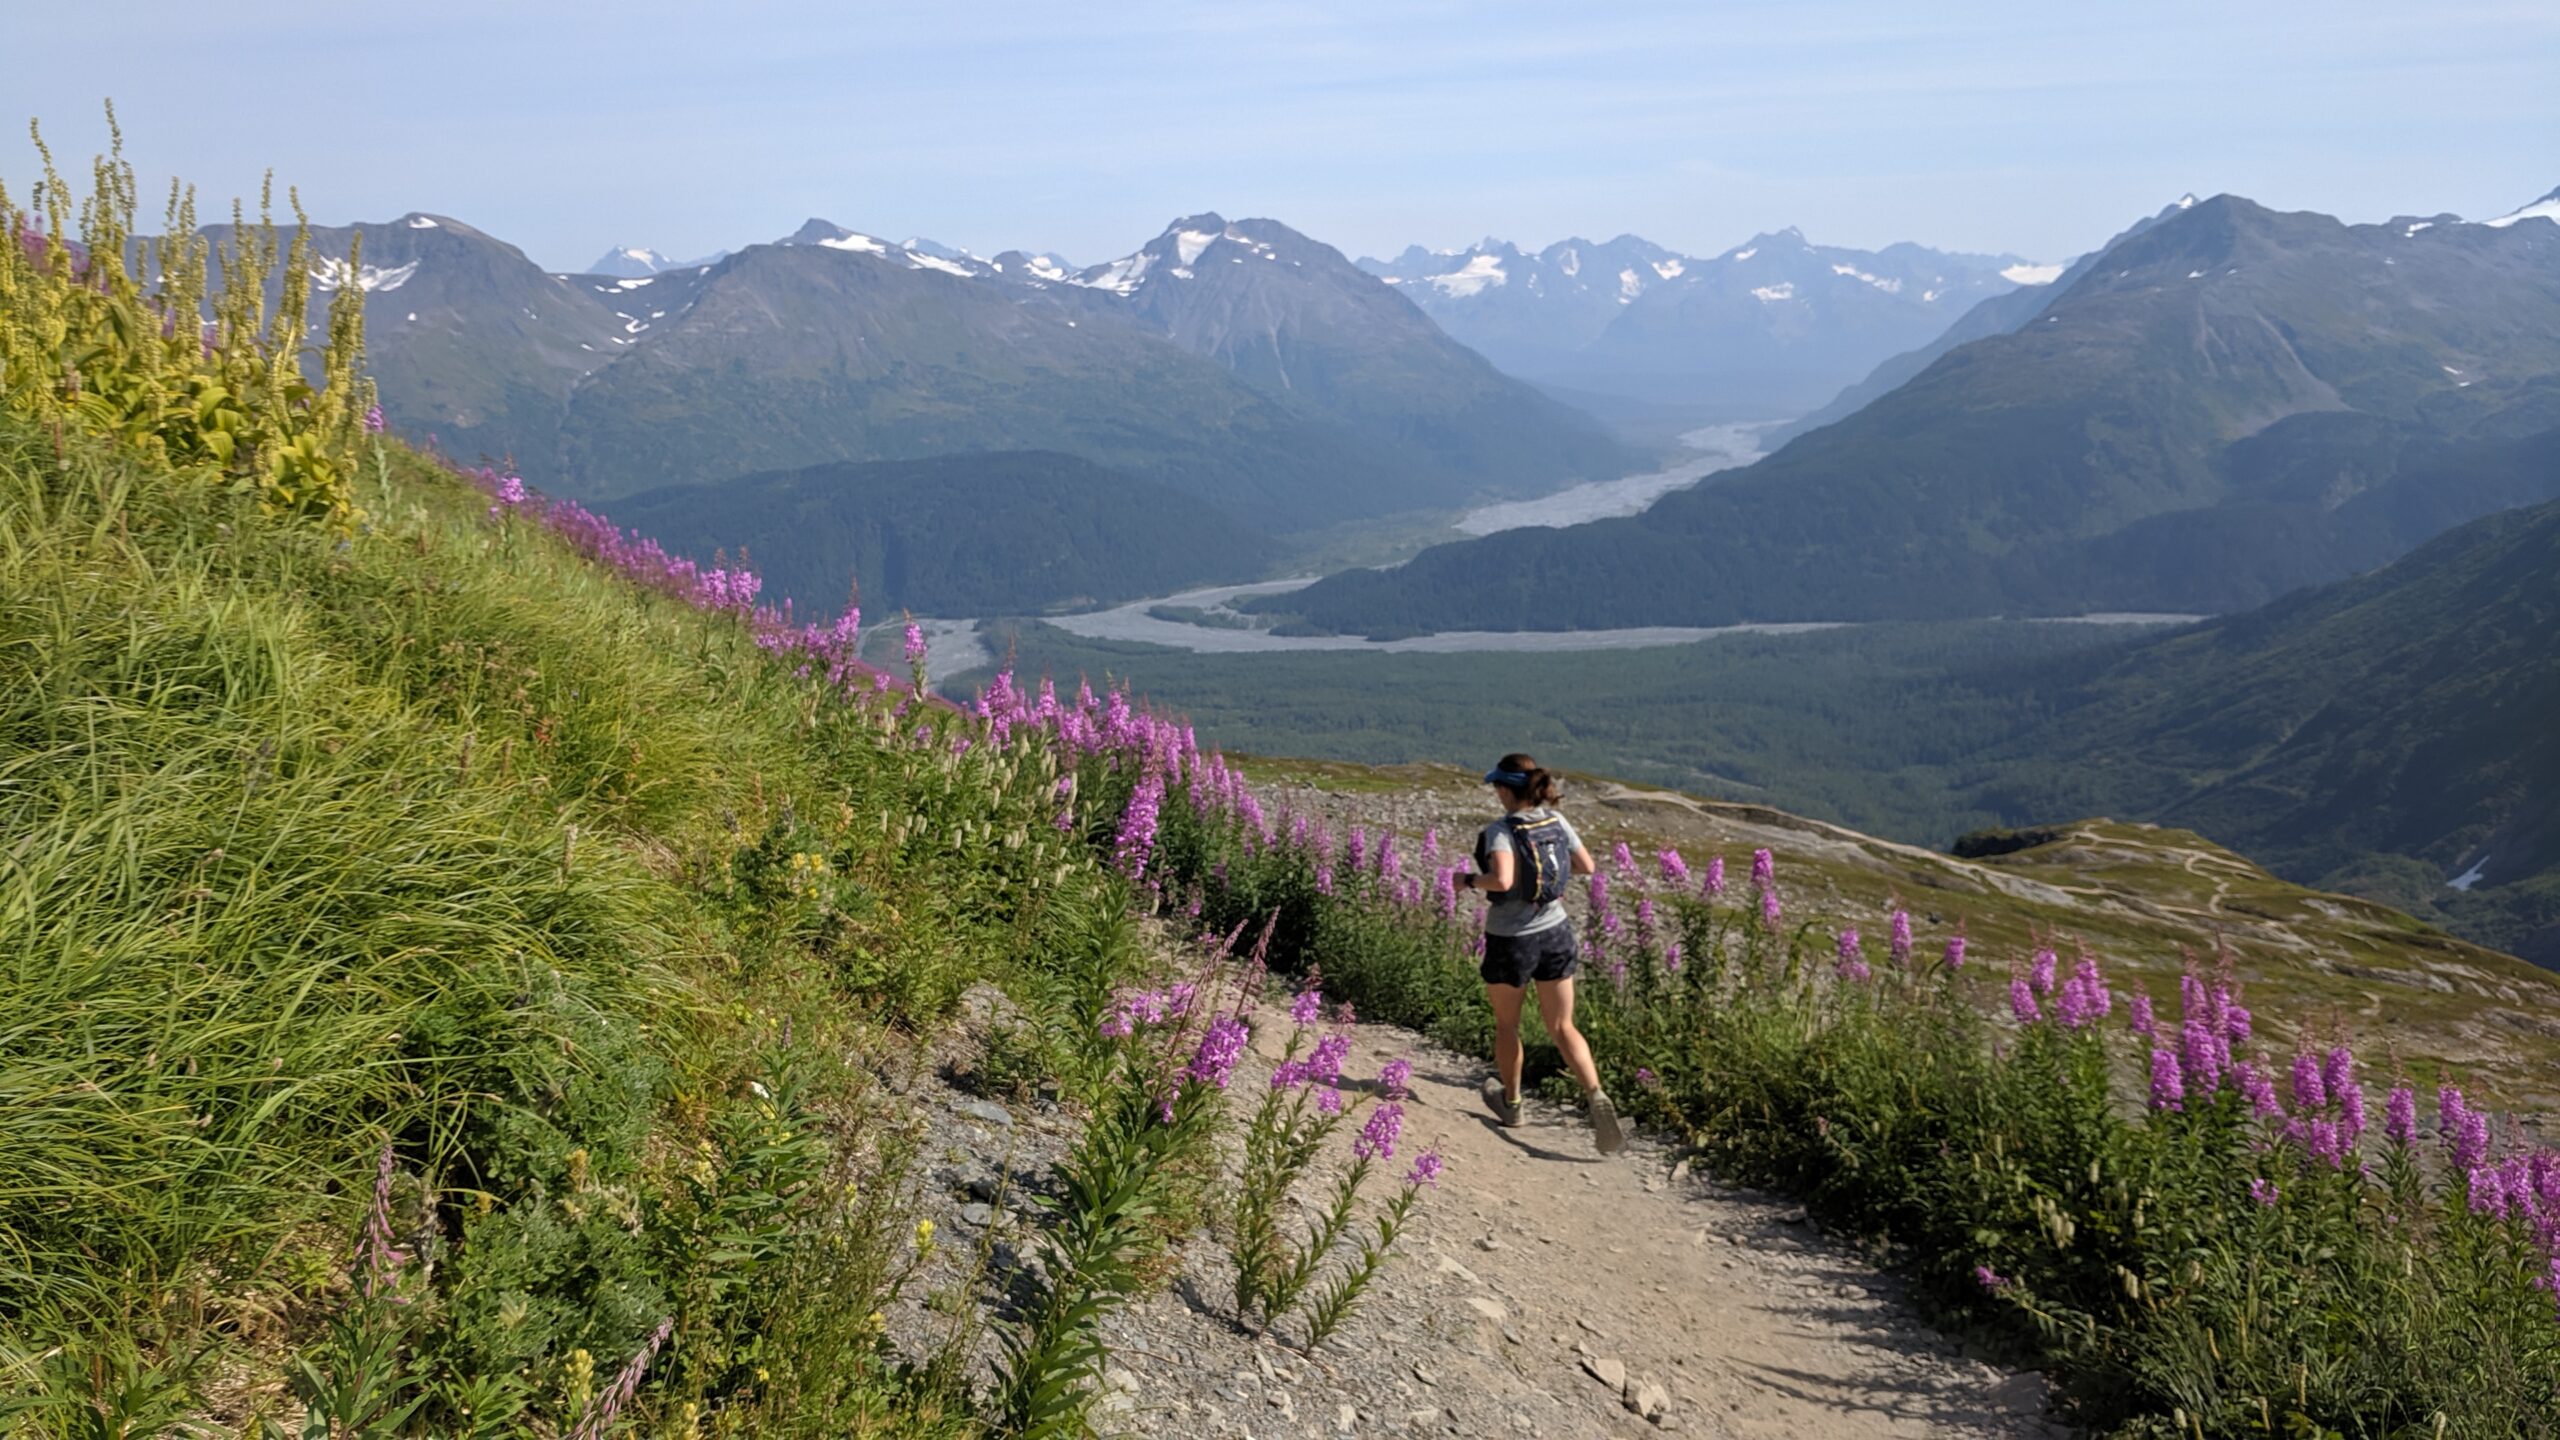 A Female Runner On A Trail Above A Deep Valley With Flowers Lining The Trail